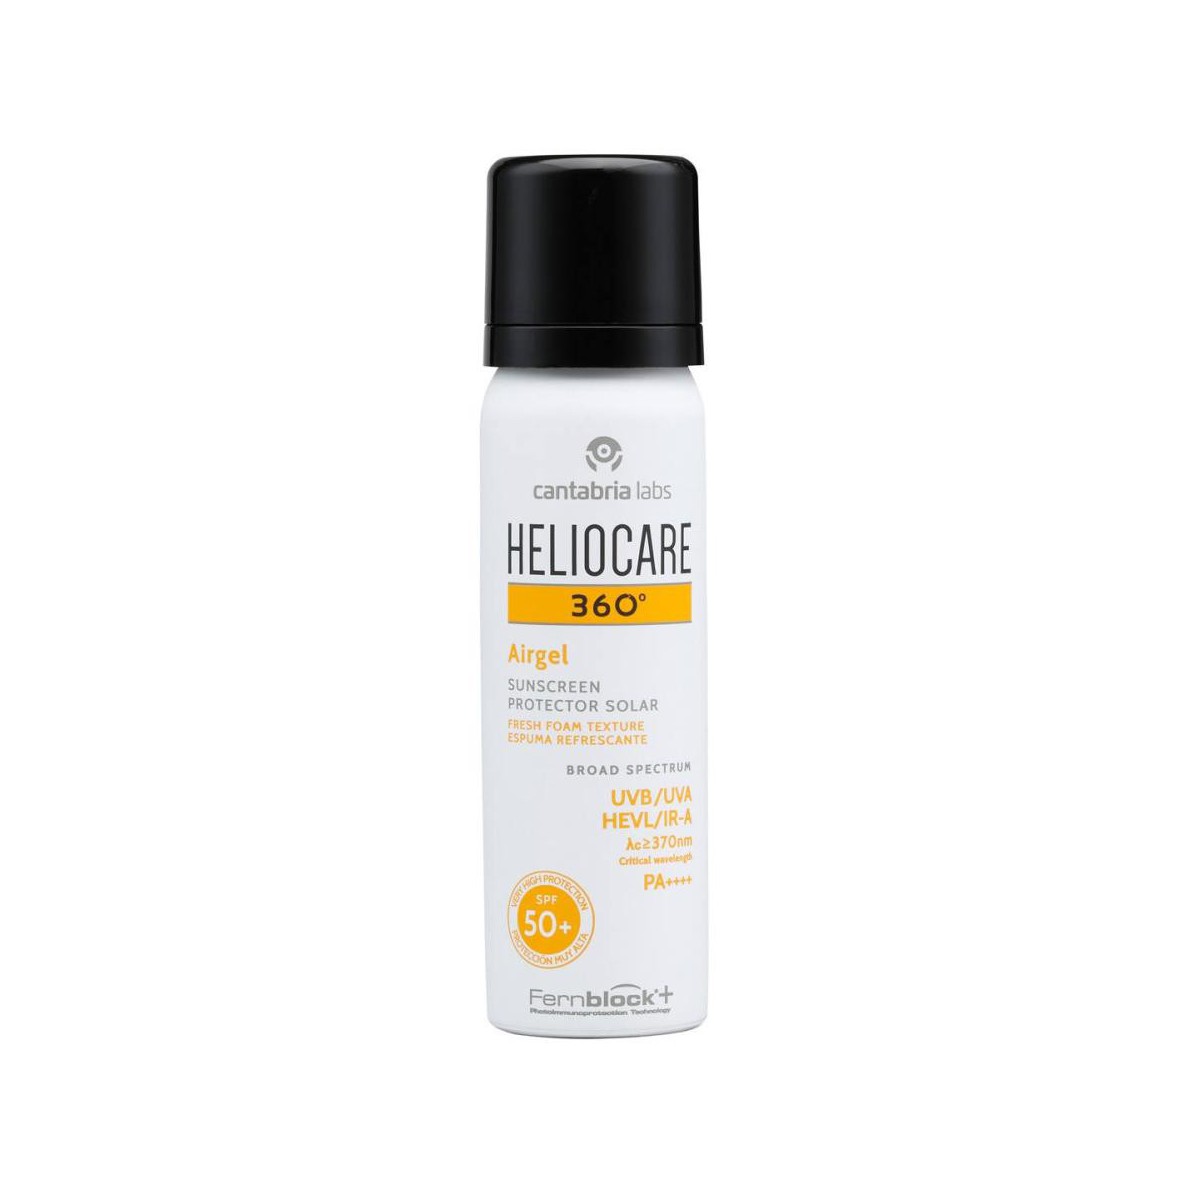 Heliocare 360º F50+ Airgel 60 ml